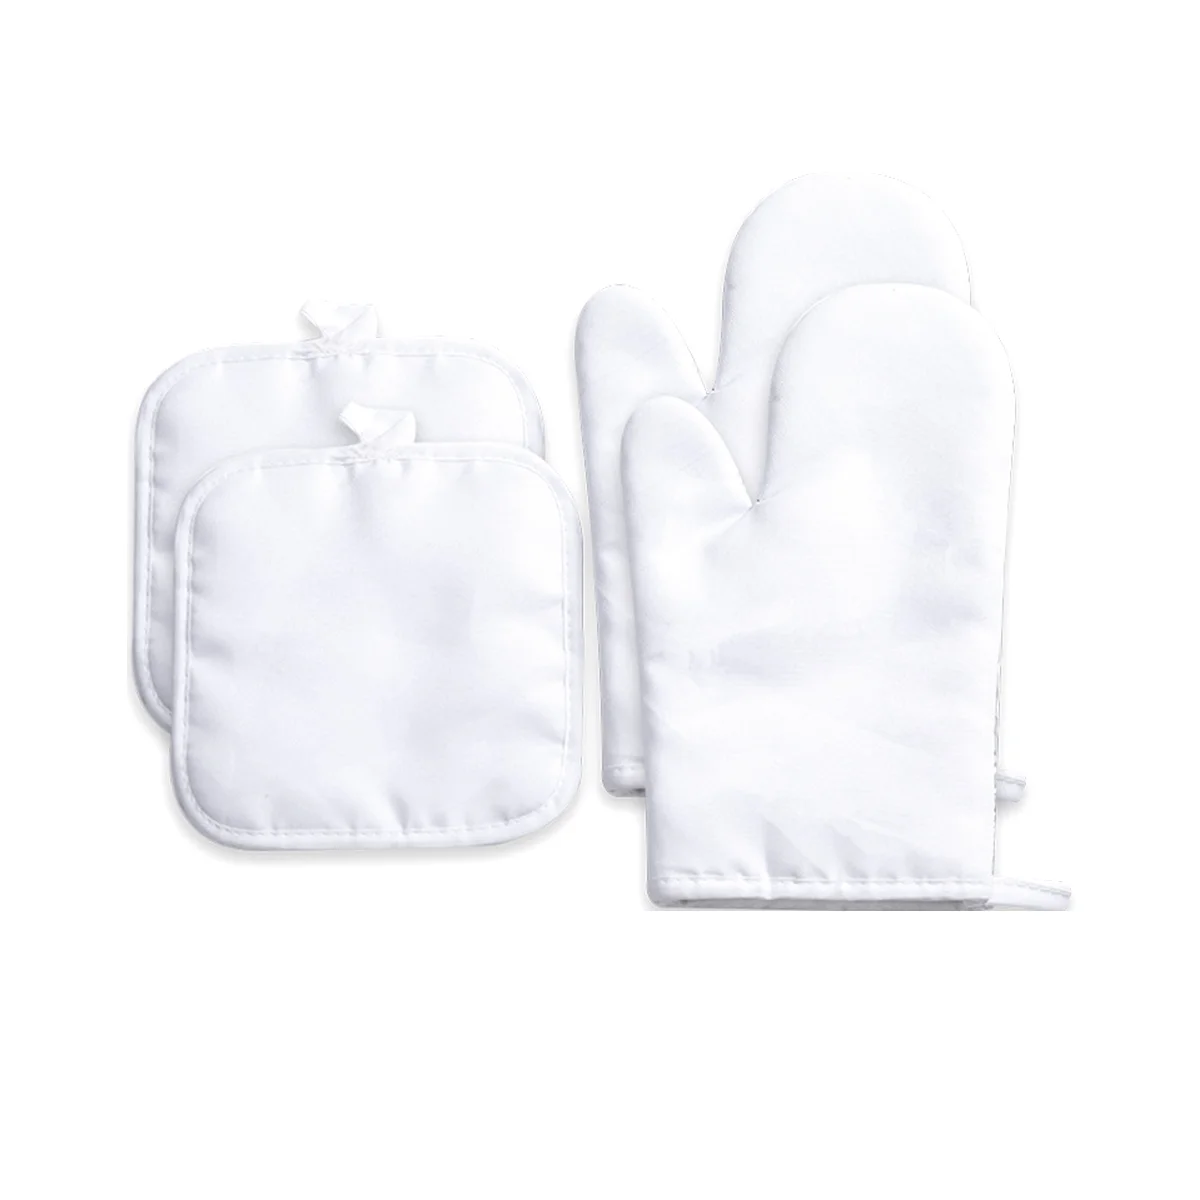 Sublimation Blank Oven Mitts Set Gloves And Sublimation Blank Pot Pad For  DIY Accessories 4Pcs - AliExpress